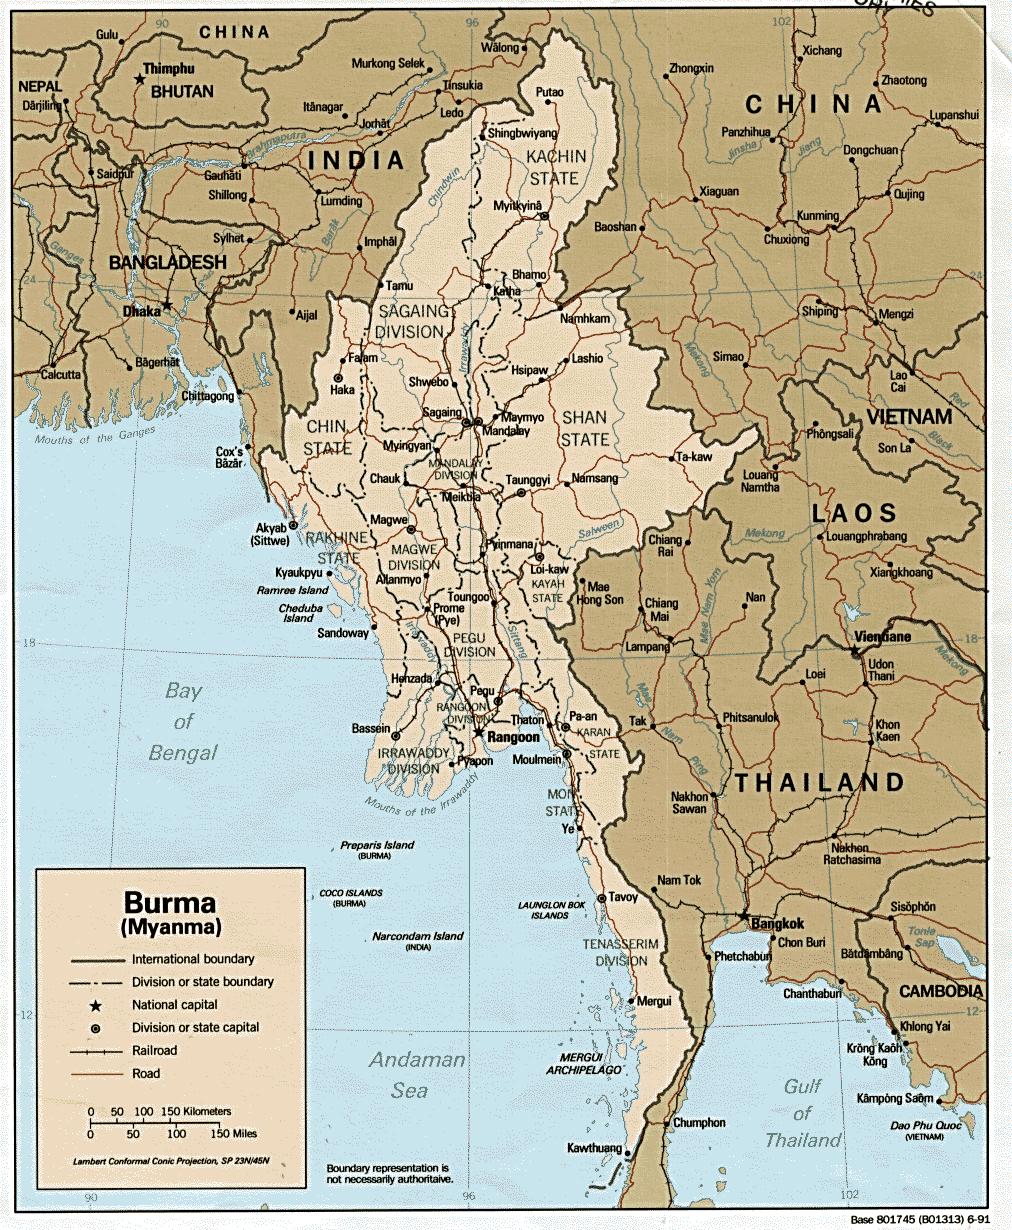 ICG Asia Report N 52, 7 May 2003 Page 26 APPENDIX A MAP OF MYANMAR